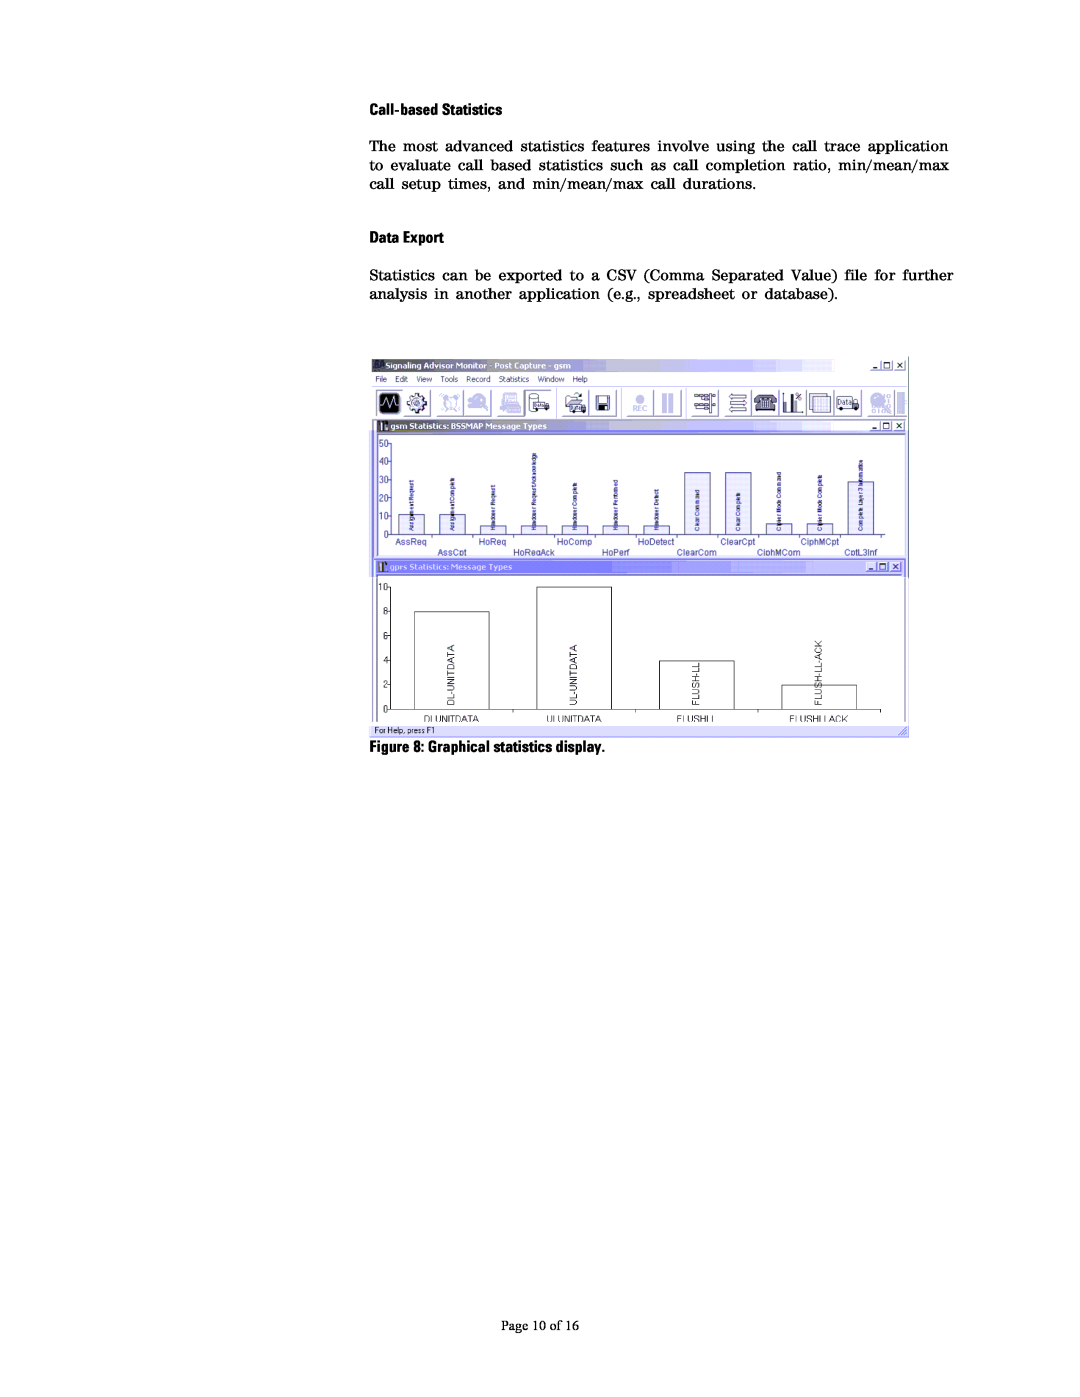 Agilent Technologies 37907A manual Call-based Statistics, Data Export, Graphical statistics display, Page 10 of 